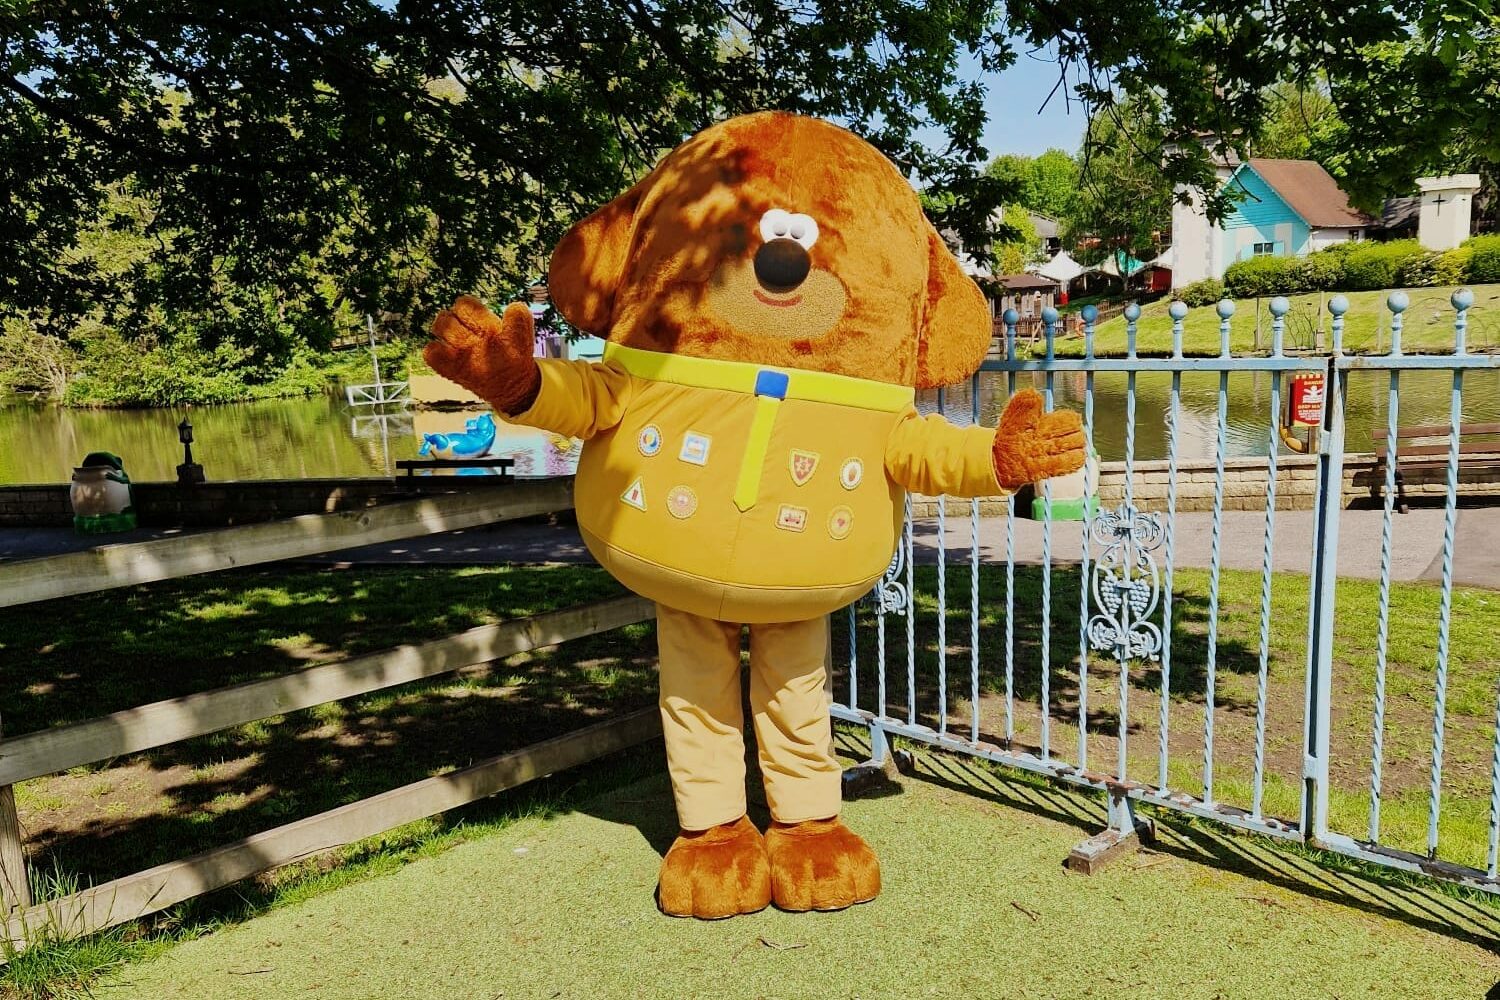 Star of Hey Duggee to meet fans at Gulliver’s Land Milton Keynes